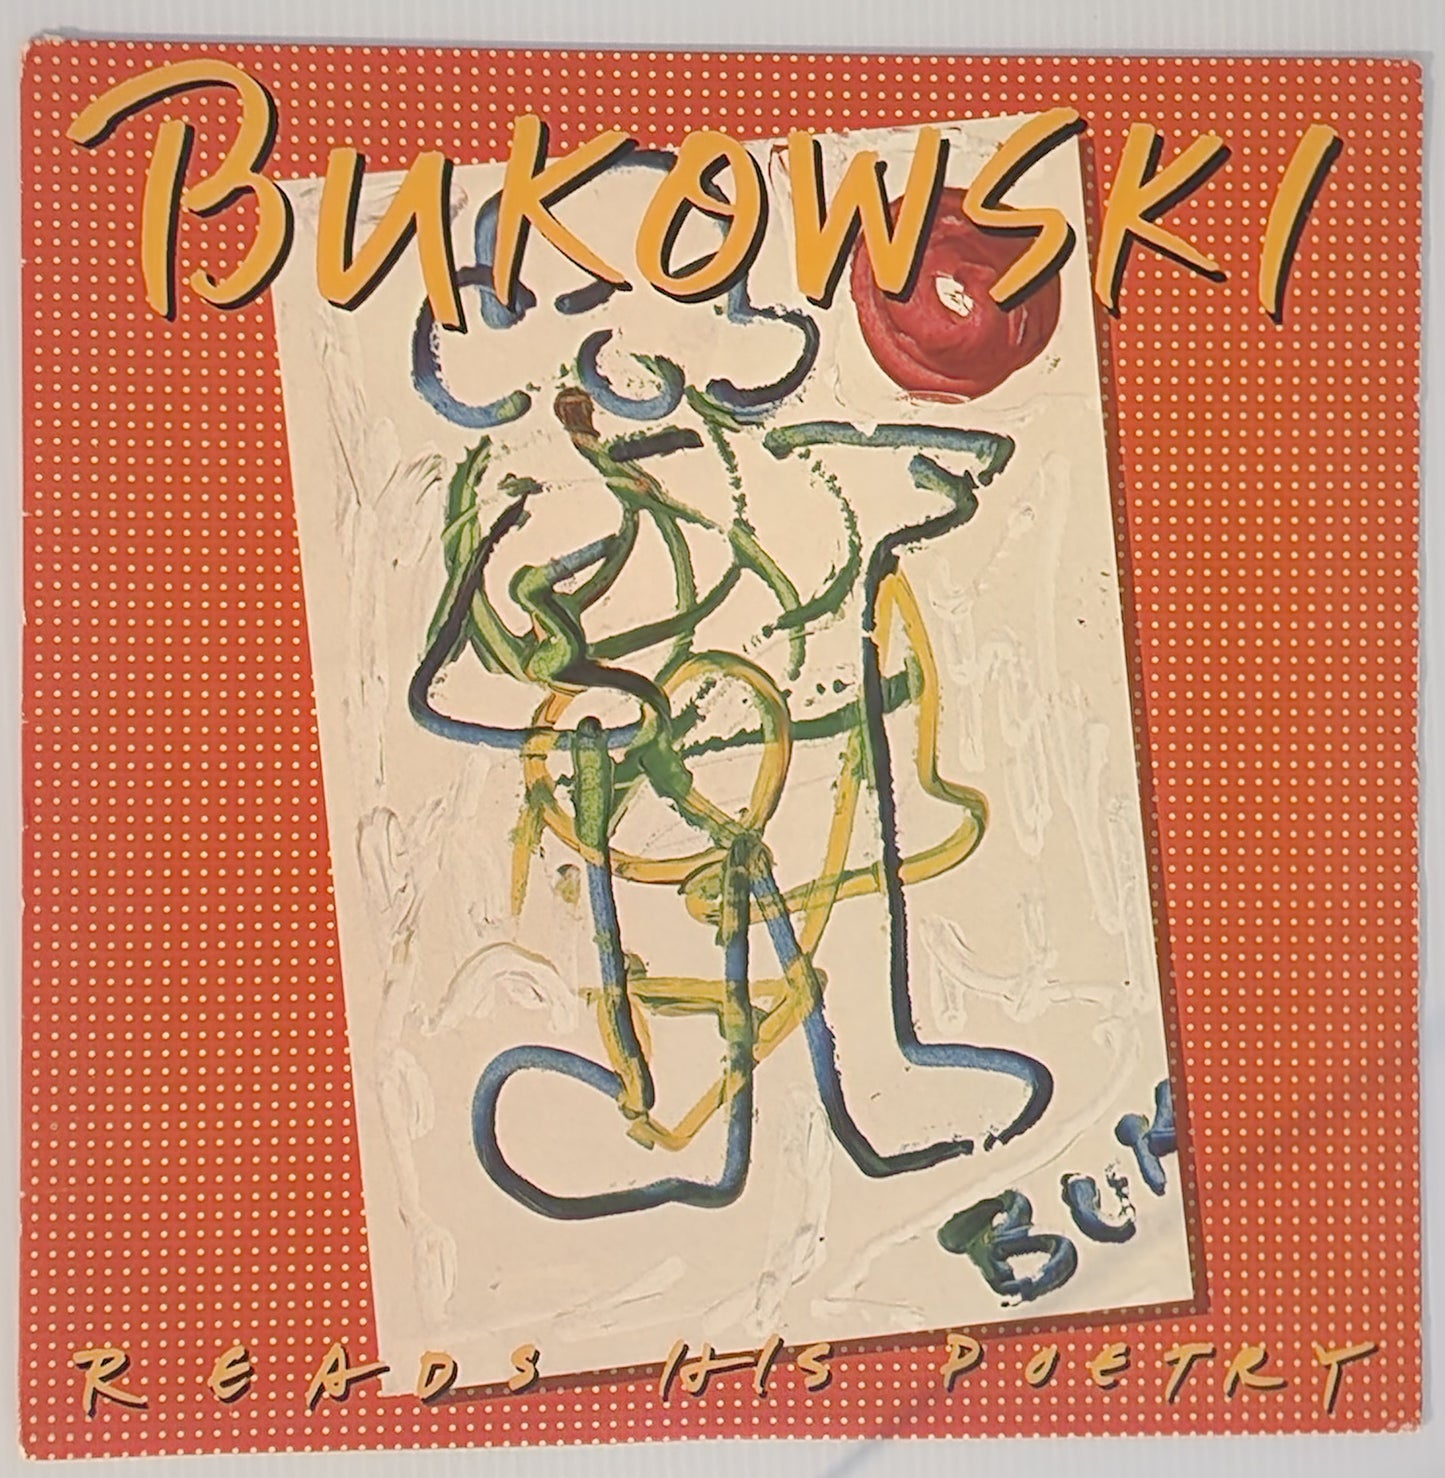 LP First Pressing: “Bukowski Reads His Poetry” Tacoma Records 1980